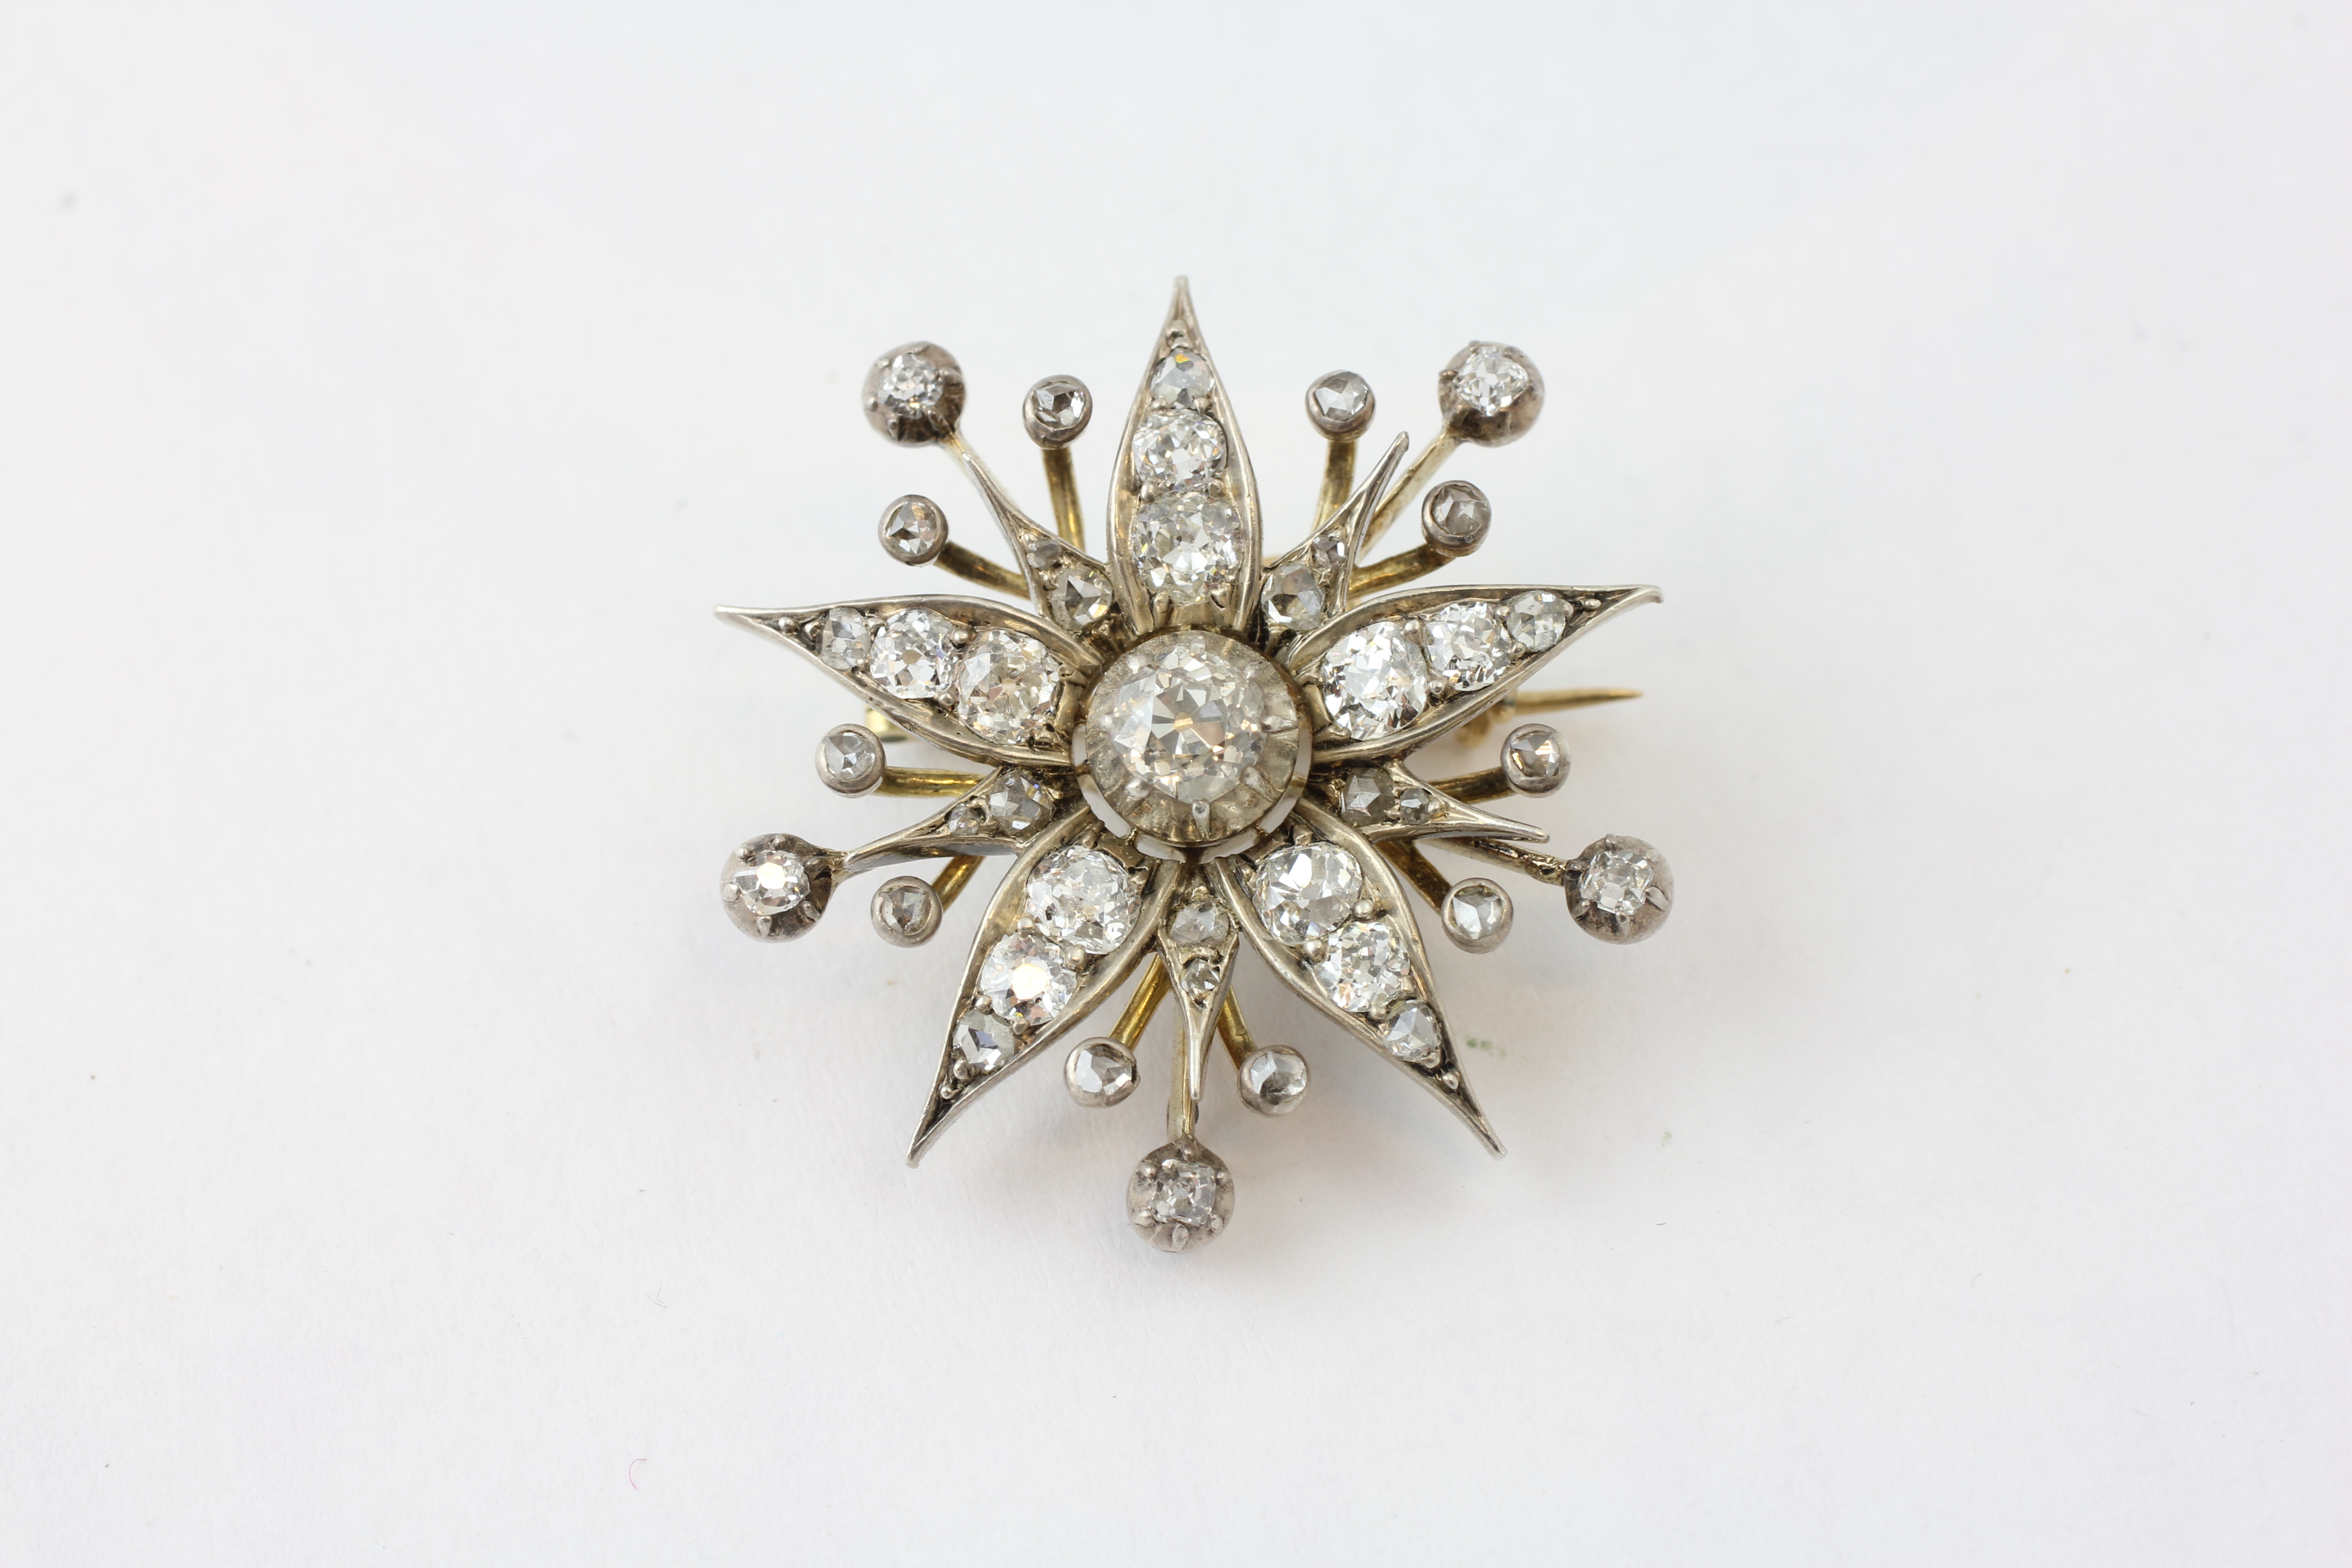 A DIAMOND BROOCH OF FLOWERHEAD FORM WITH ADJUSTMENT FOR A PENDANT, SET WITH 42 OLD CUT DIAMONDS,